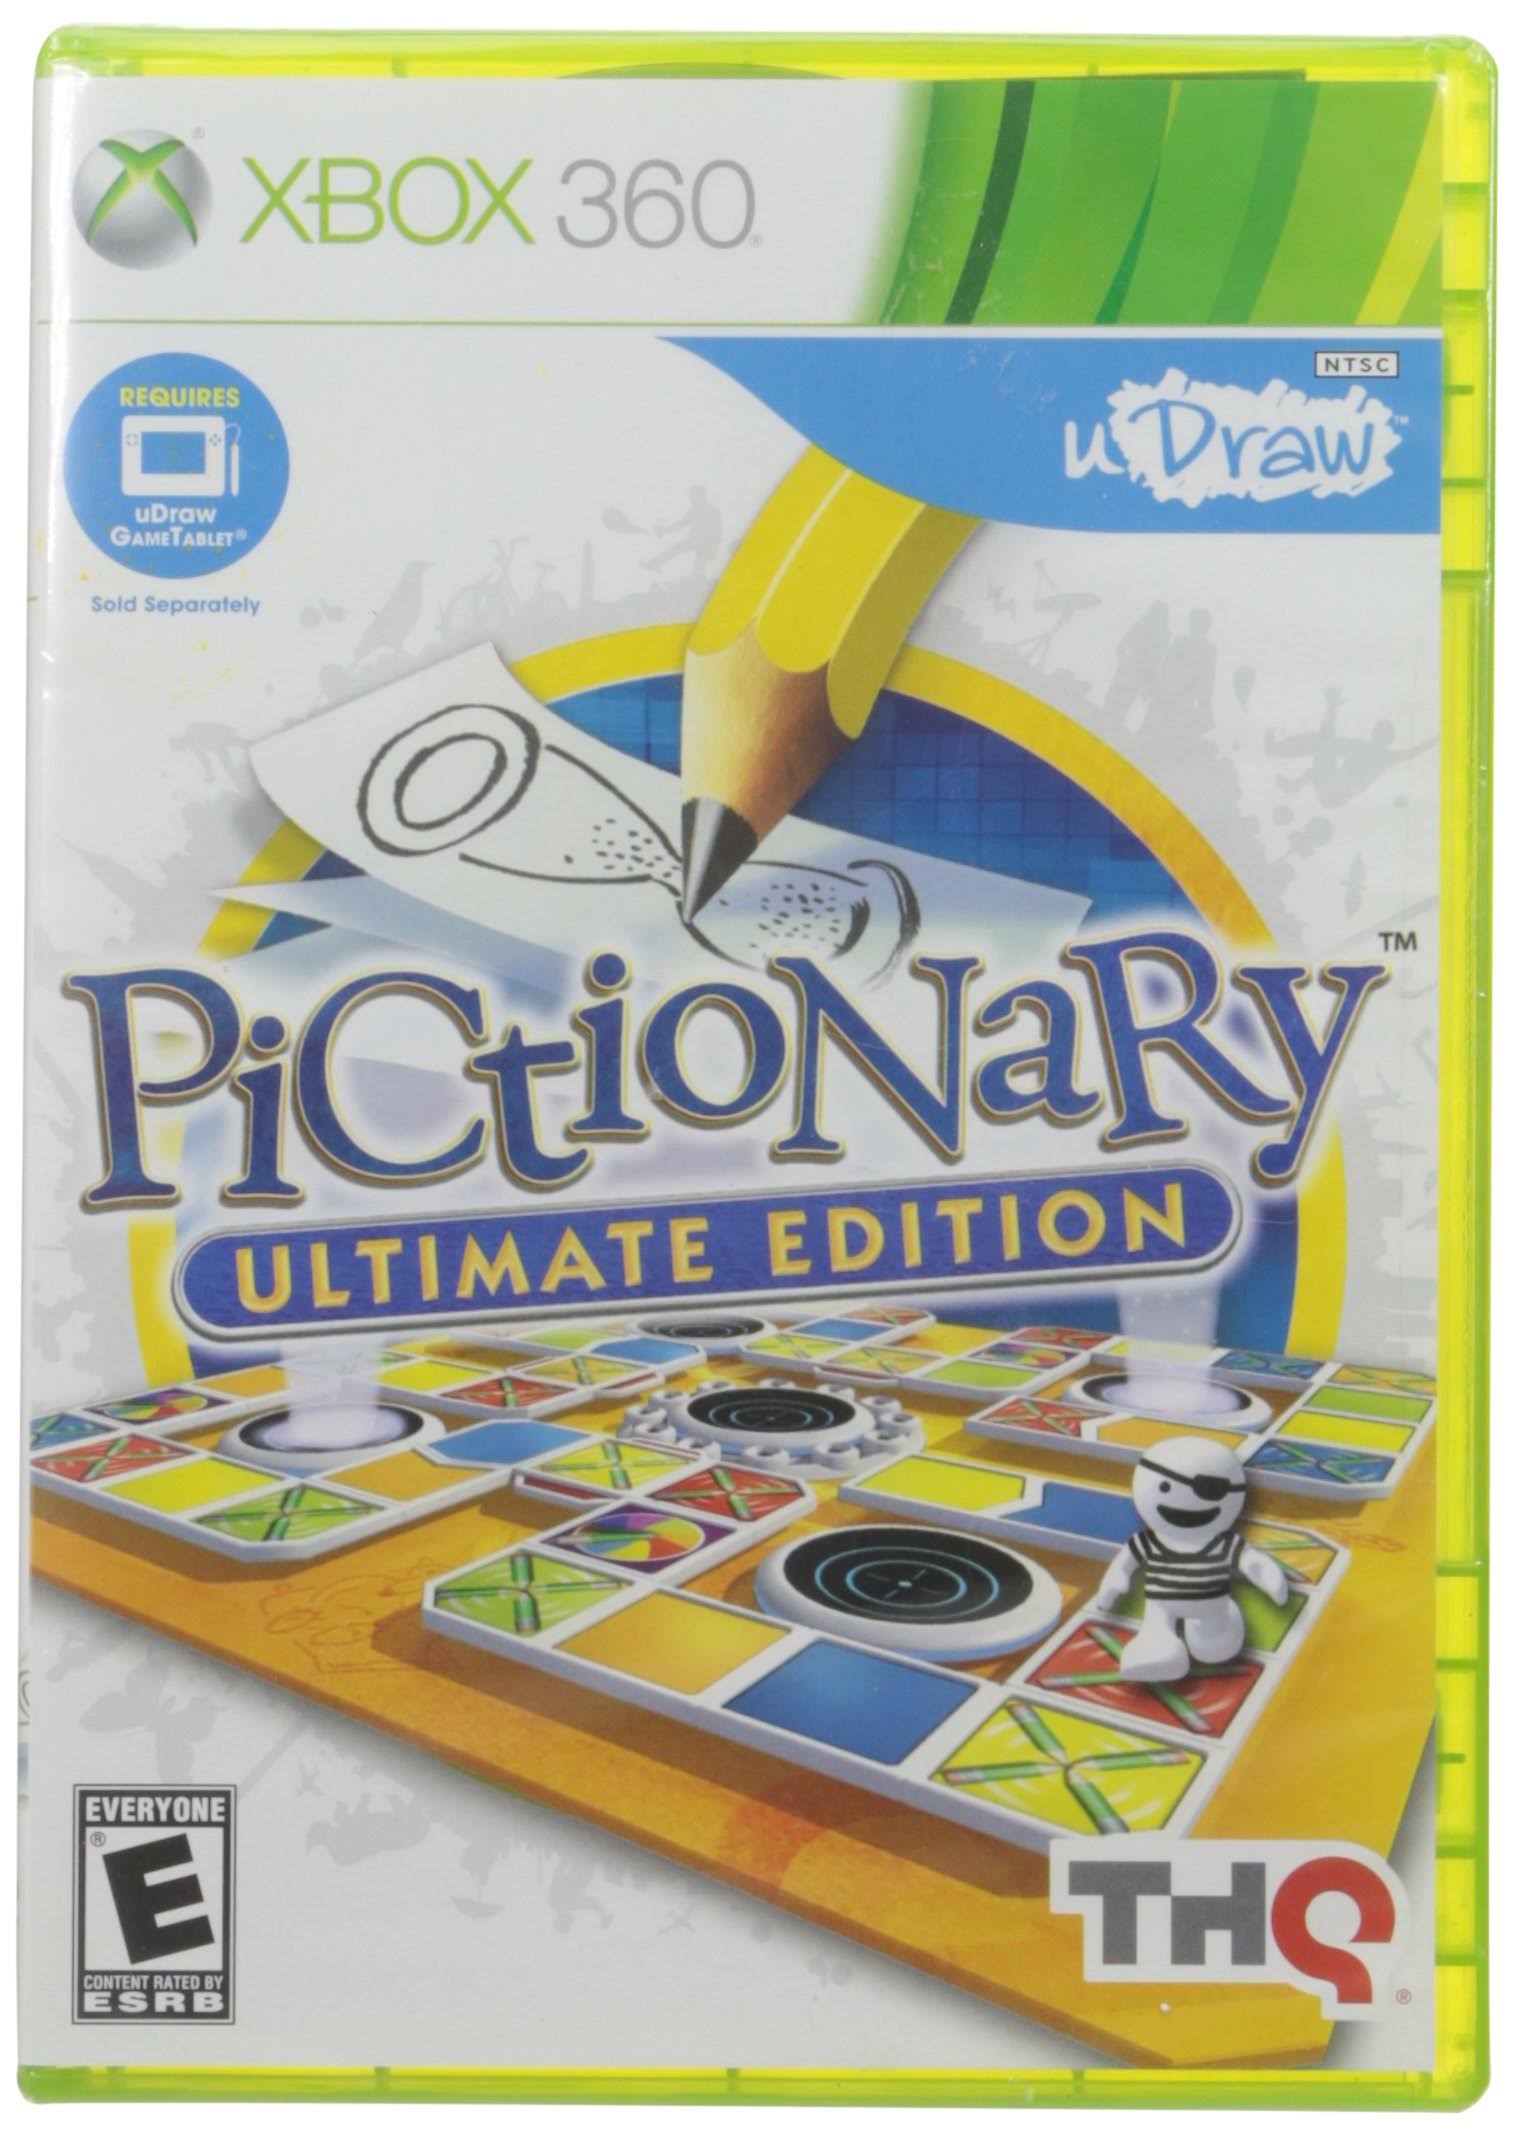 Pictionary: Ultimate Edition - Xbox 360